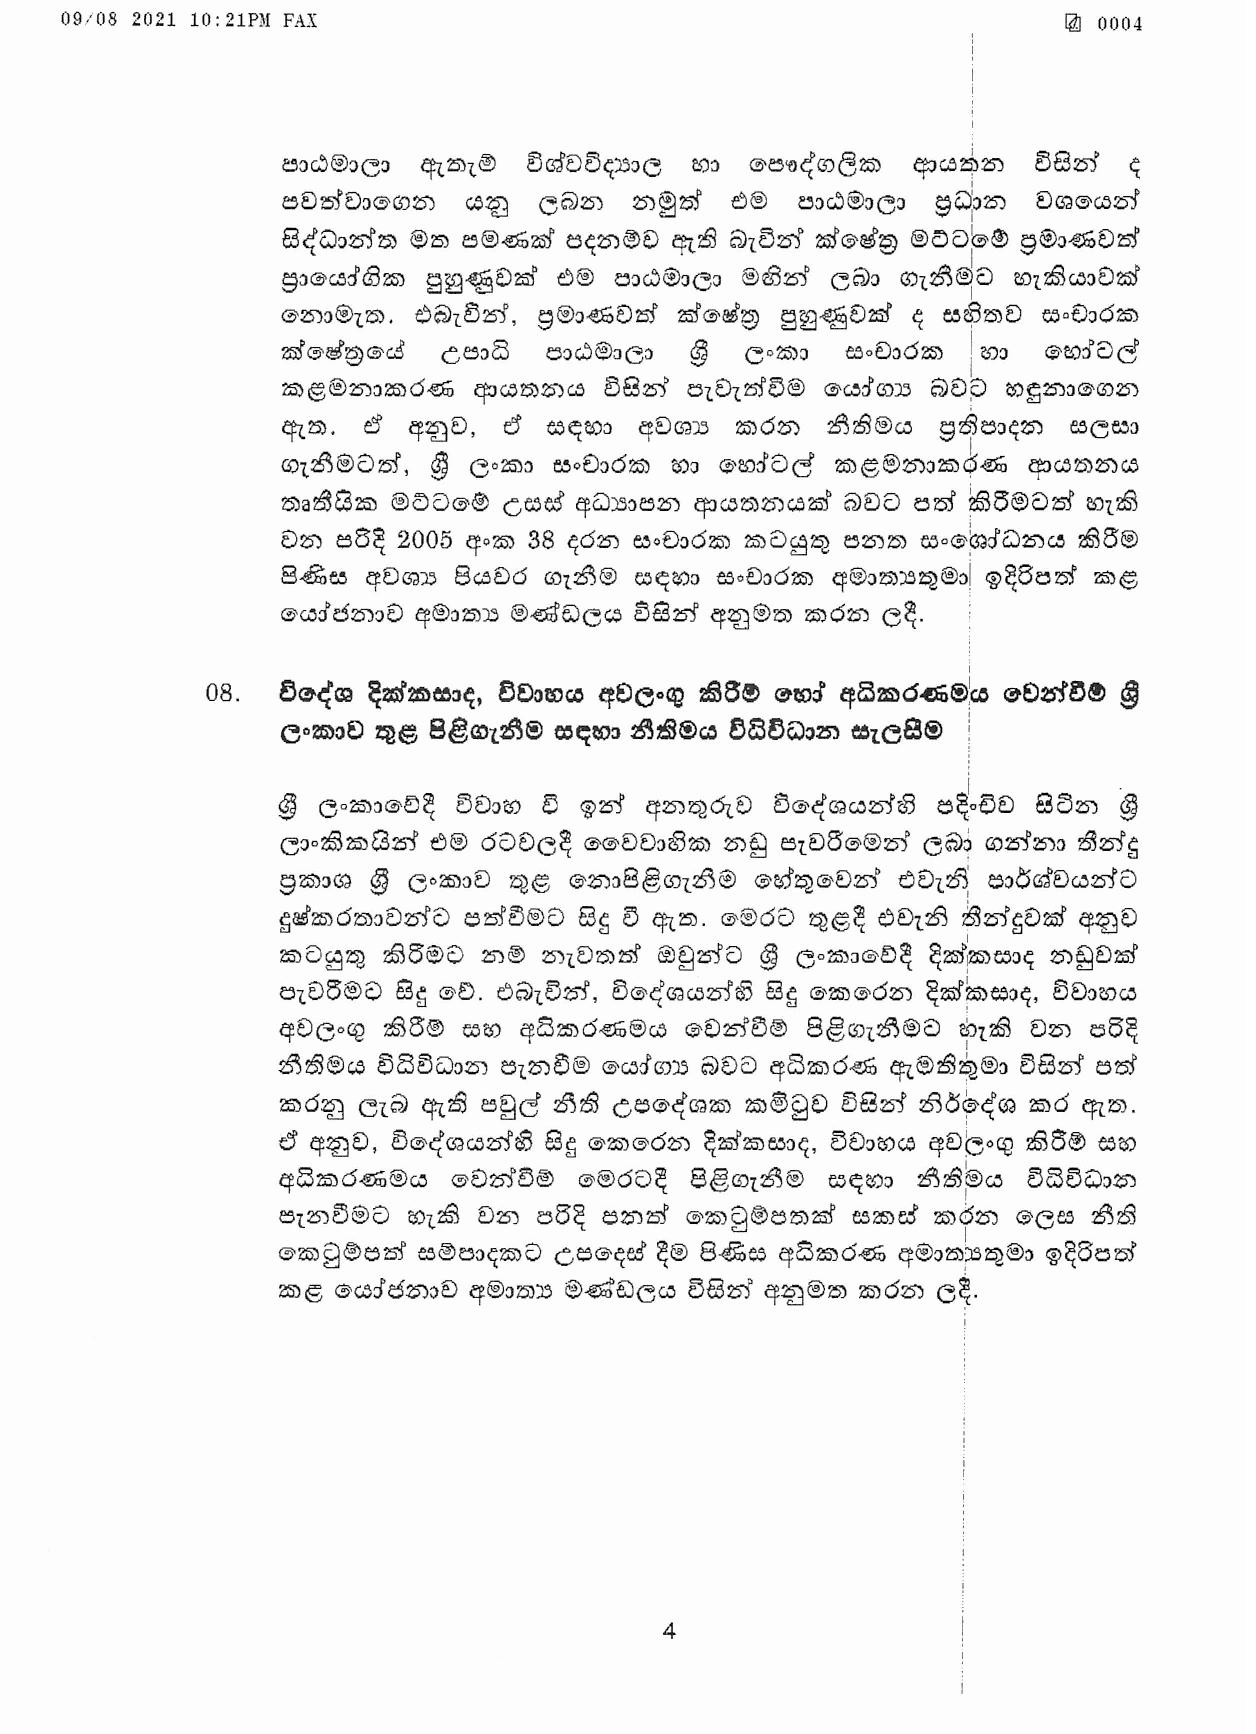 Cabinet Decision on 09.08.2021 page 004